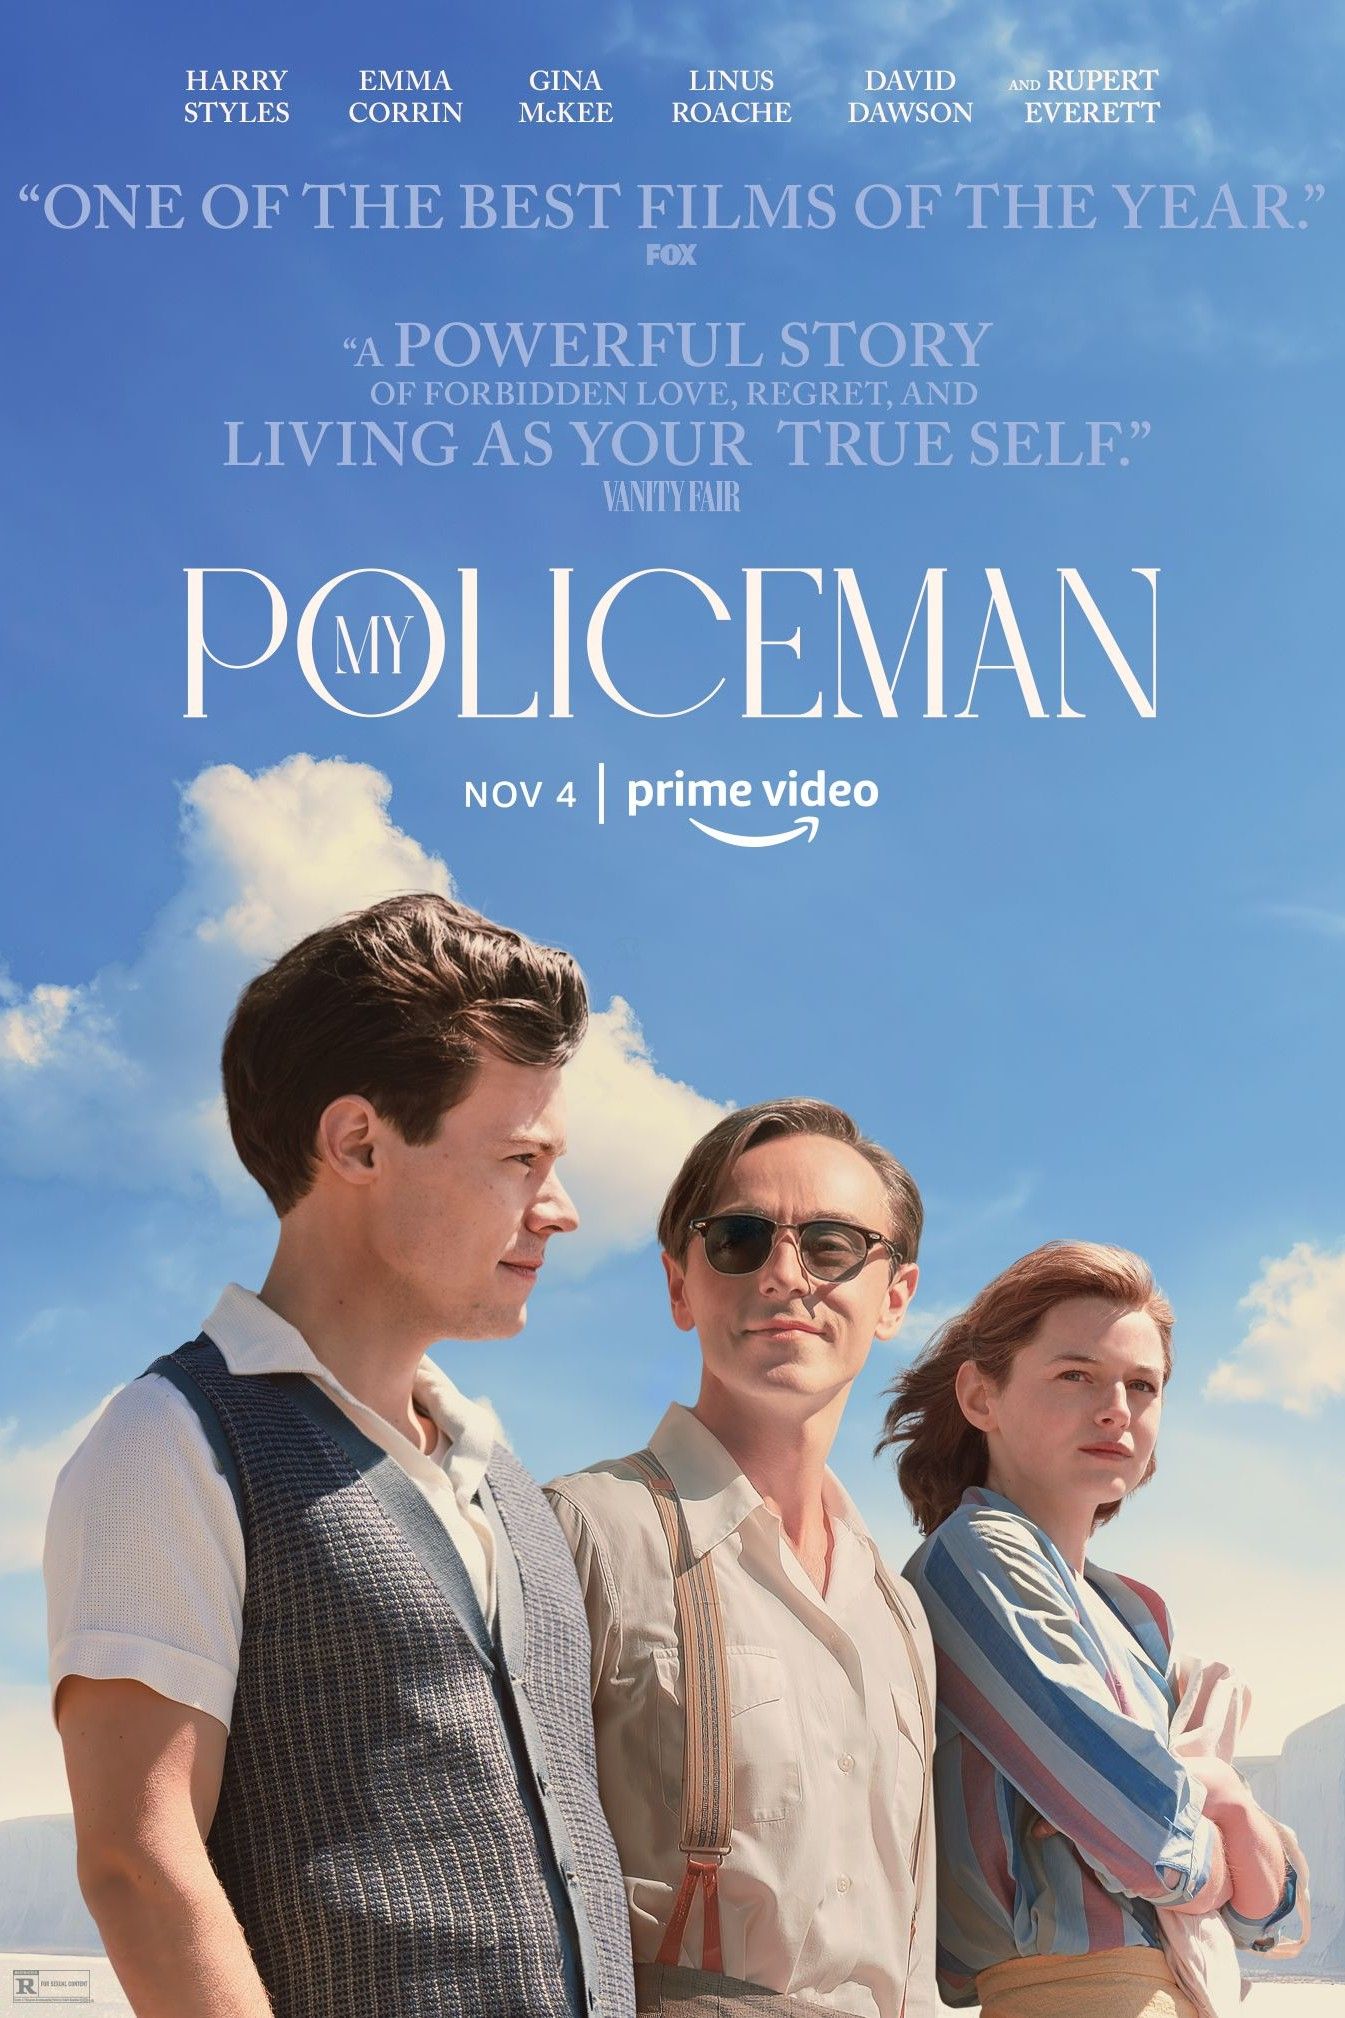 My Policeman New Poster